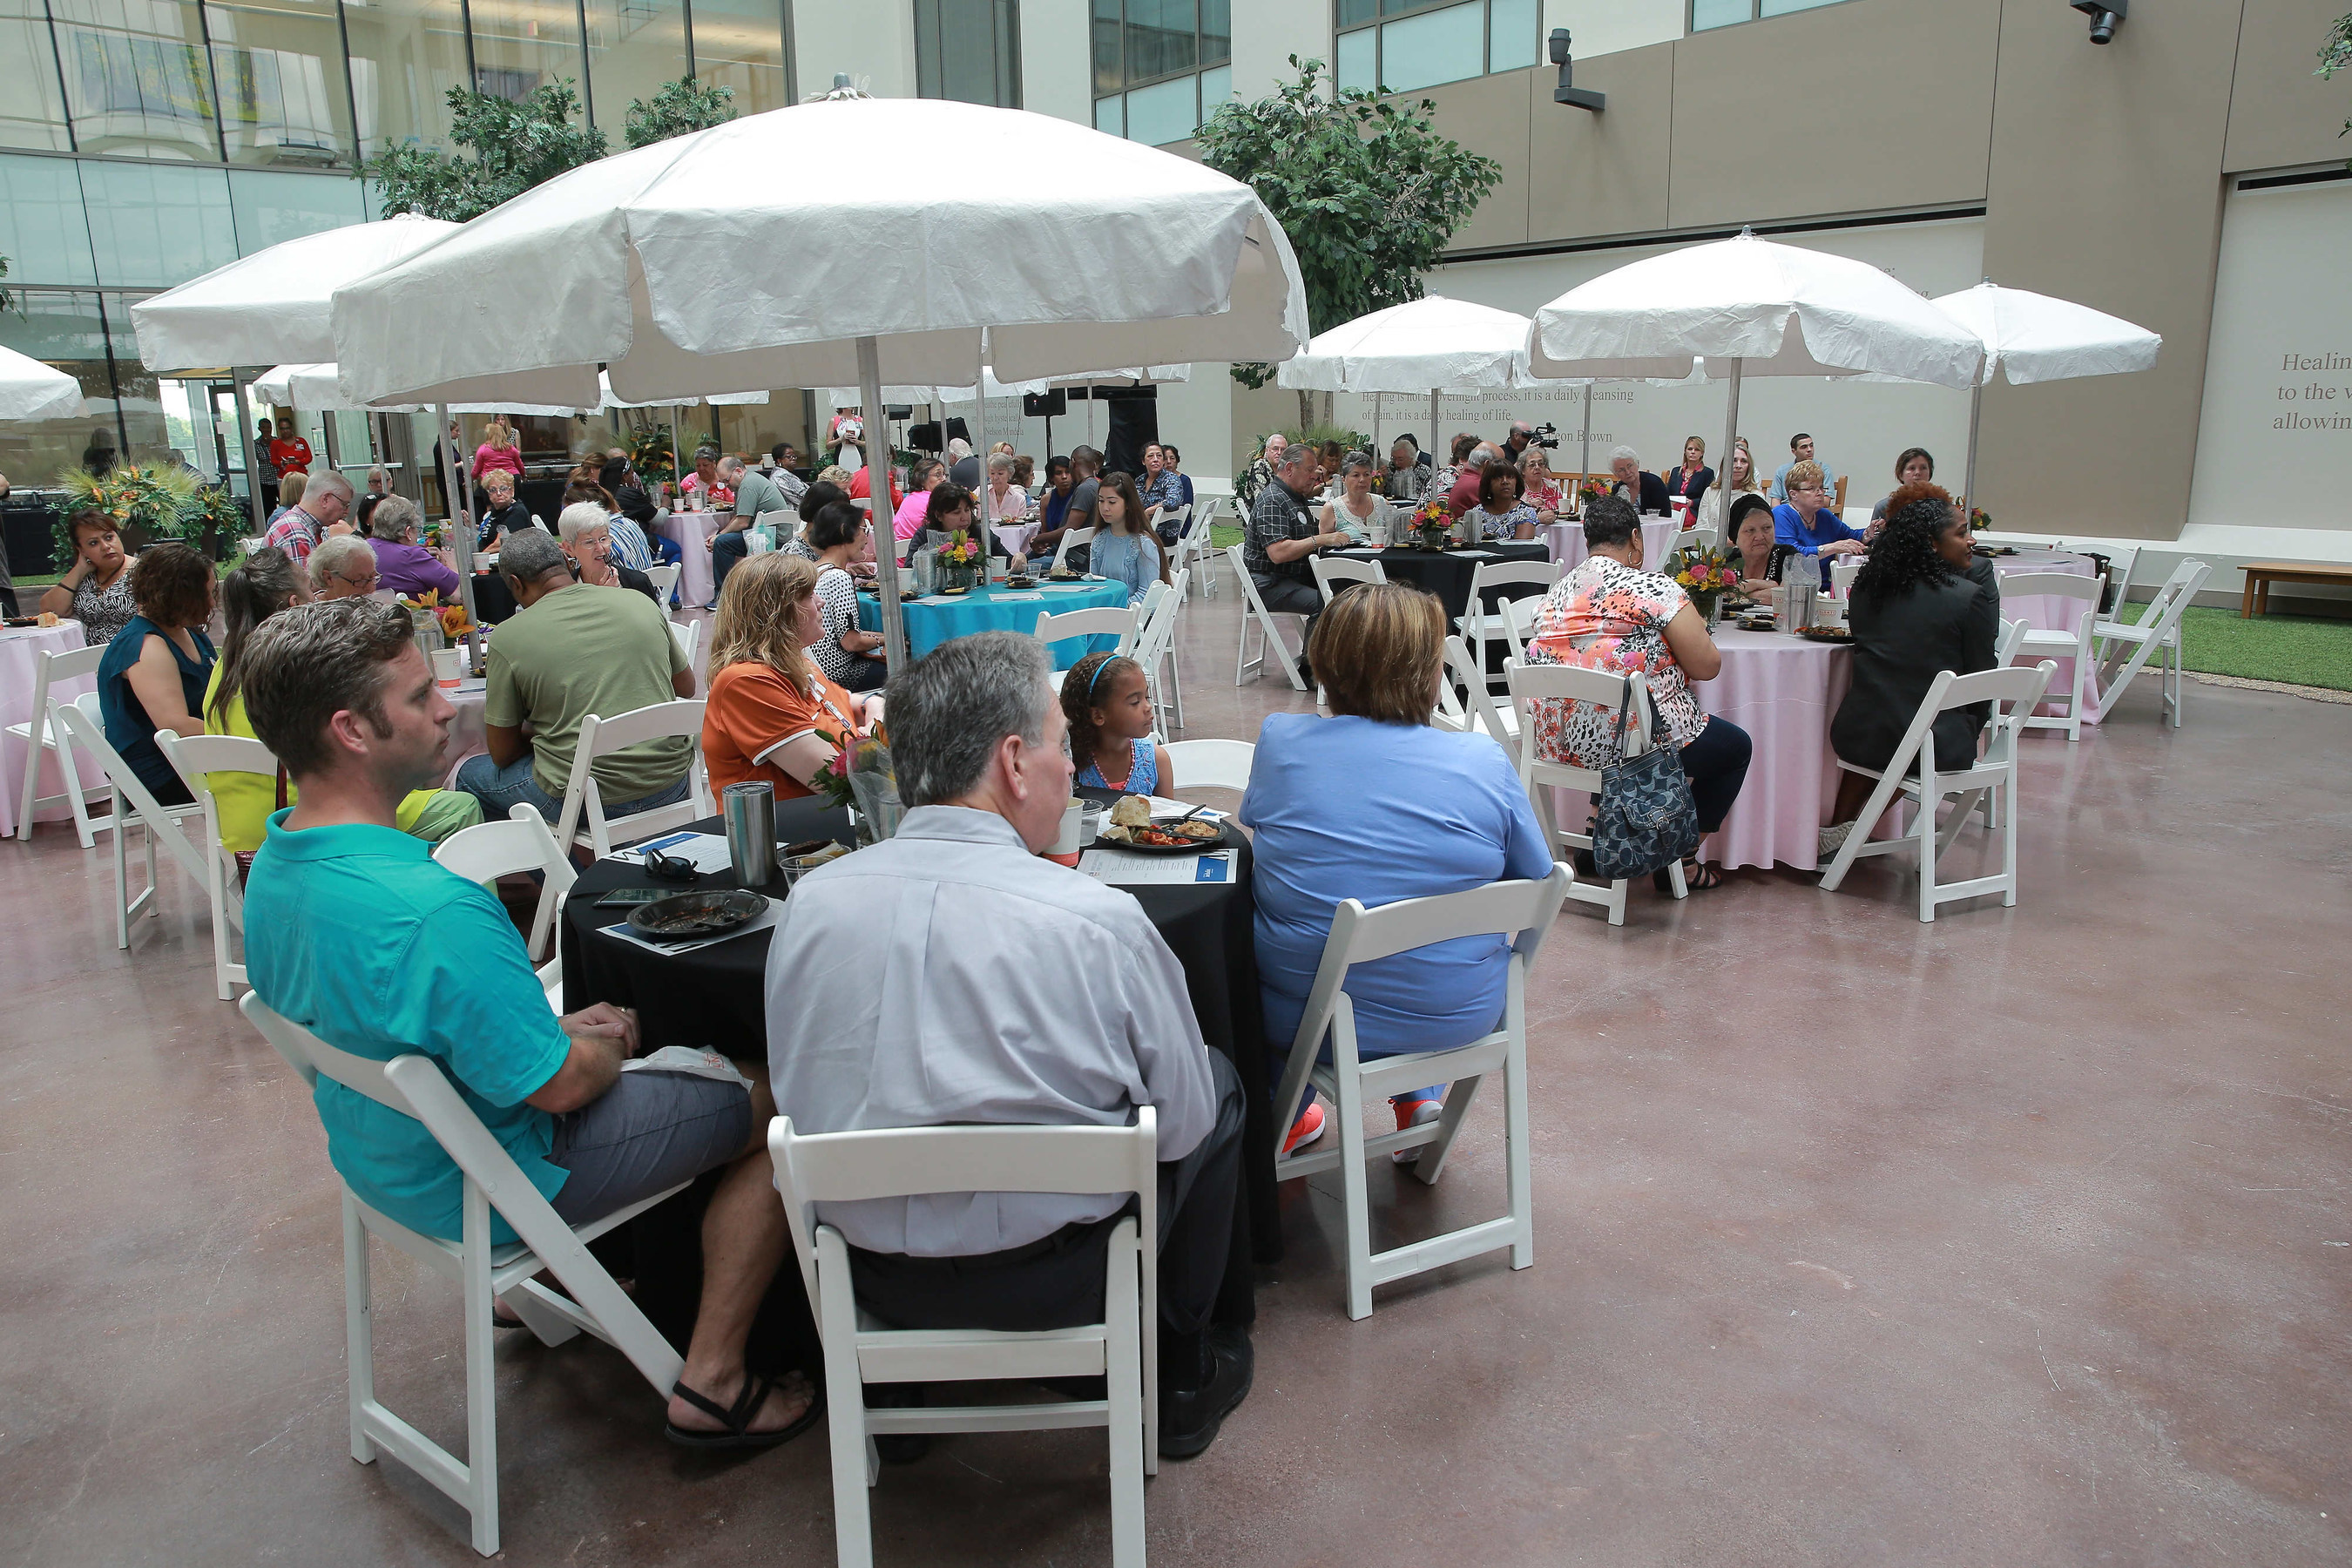 Houston Methodist Willowbrook Hospital celebrates cancer survivors and caregivers during annual National Cancer Survivors Day luncheon & balloon release.